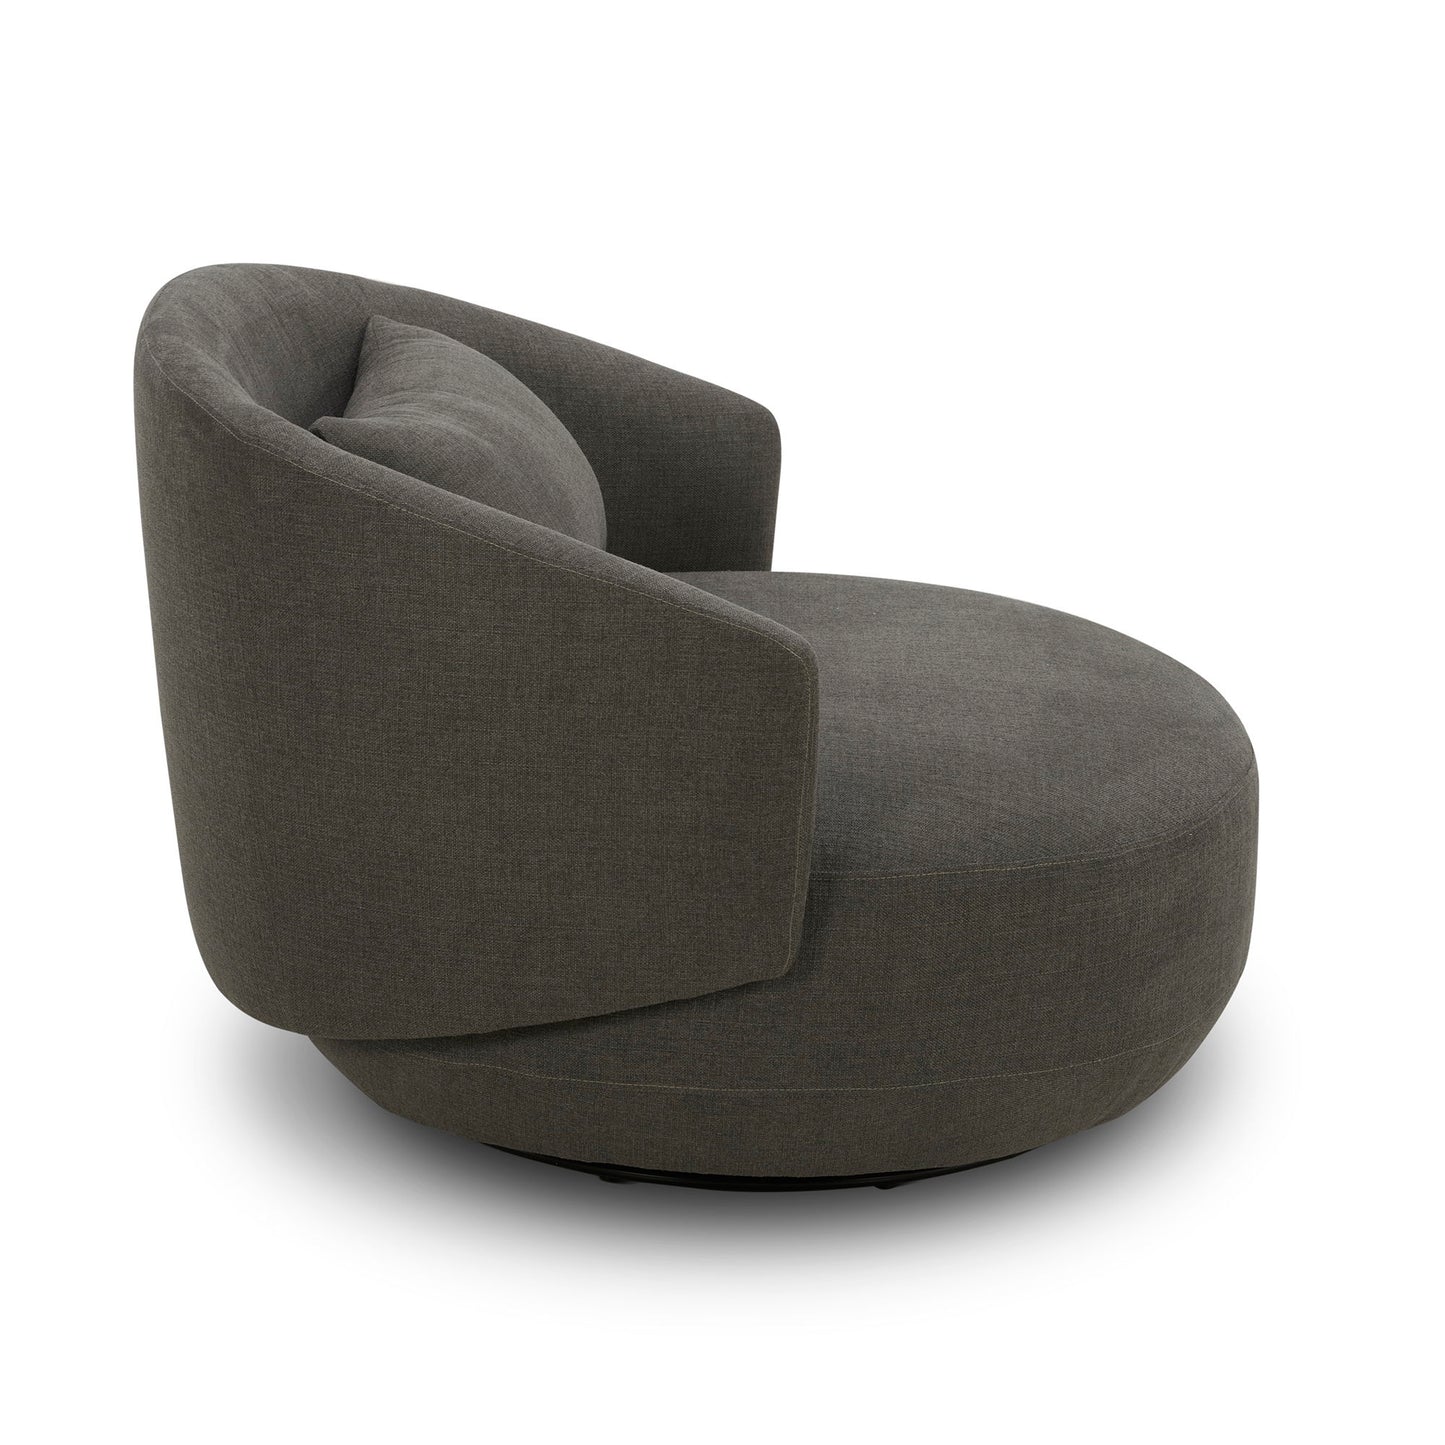 Haley - Upholstered Swivel Cuddler Chair - Charcoal